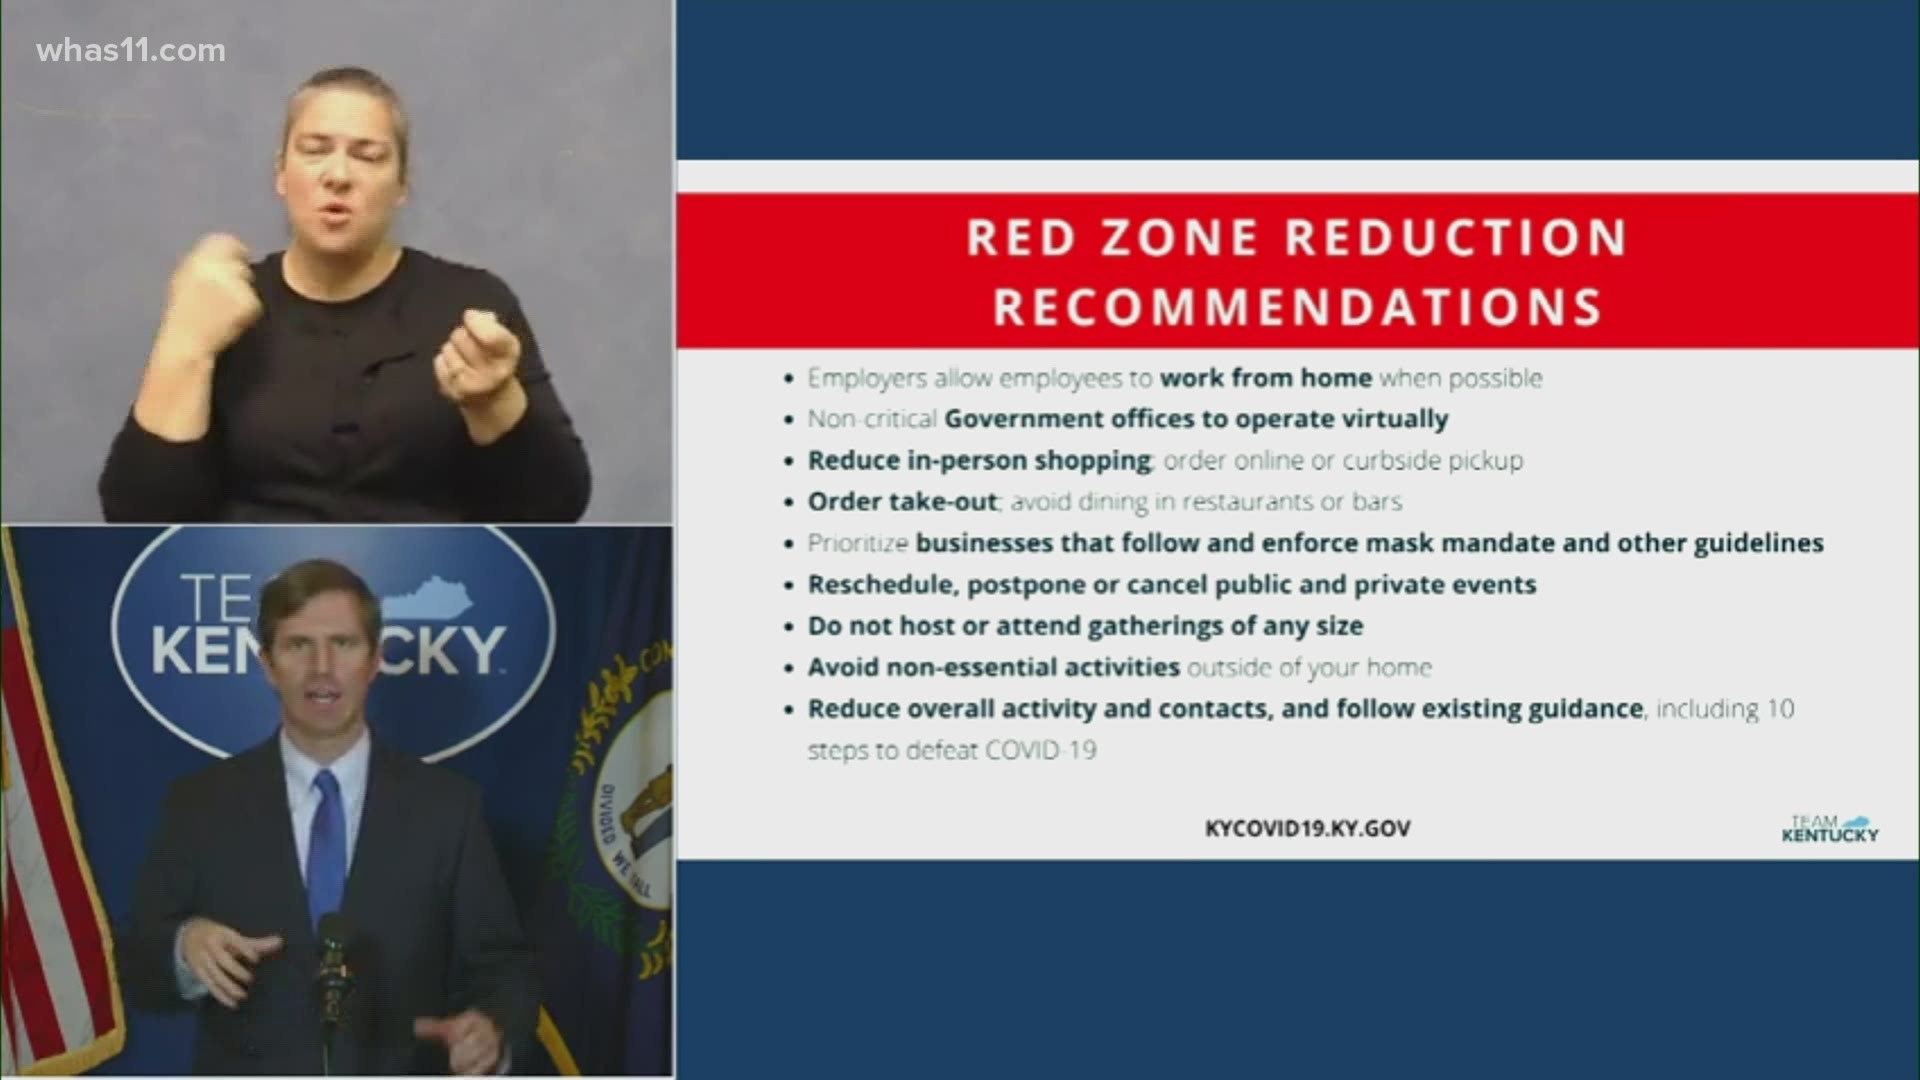 As Kentucky sees a significant increase in COVID-19 cases, the state has issued new recommendations for counties in the red zone.